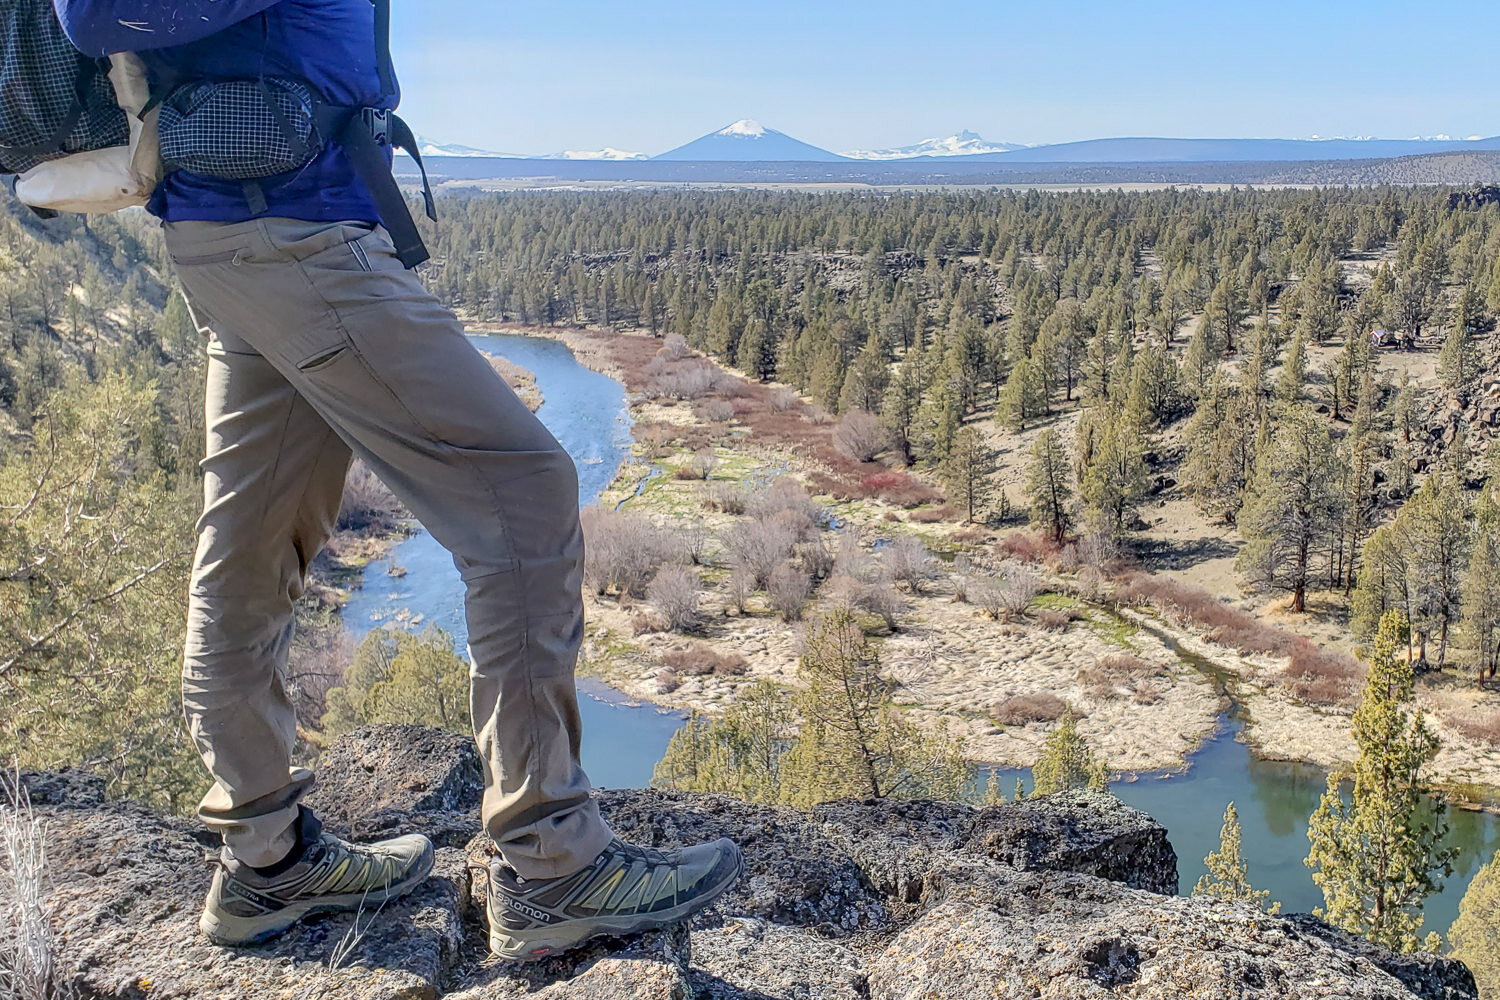 The Kuhl Deceptr Pants are comfy and stretchy for the trail, and stylish for wearing around town.